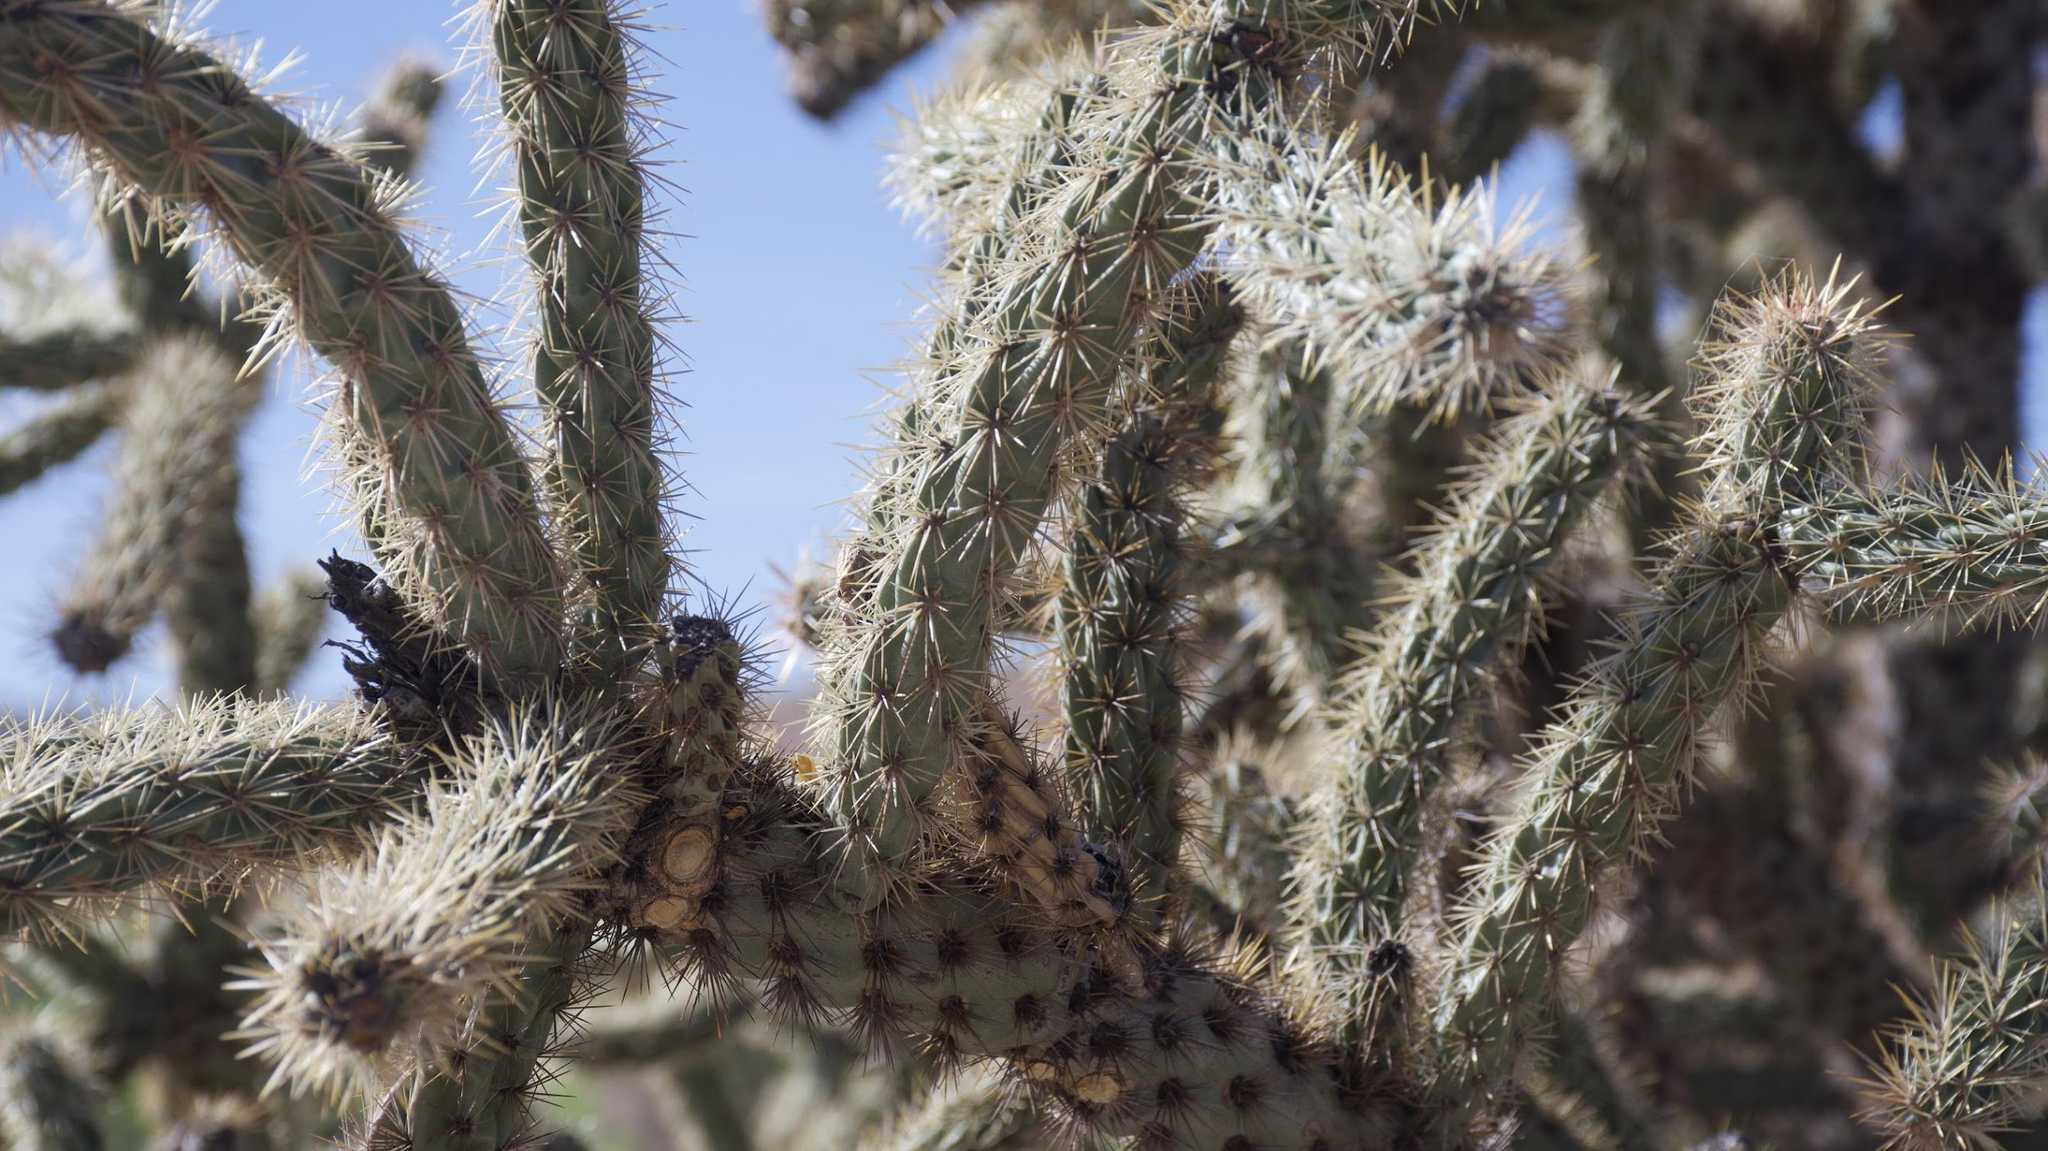 One of many cactus plants found at Kilbourne Hole.